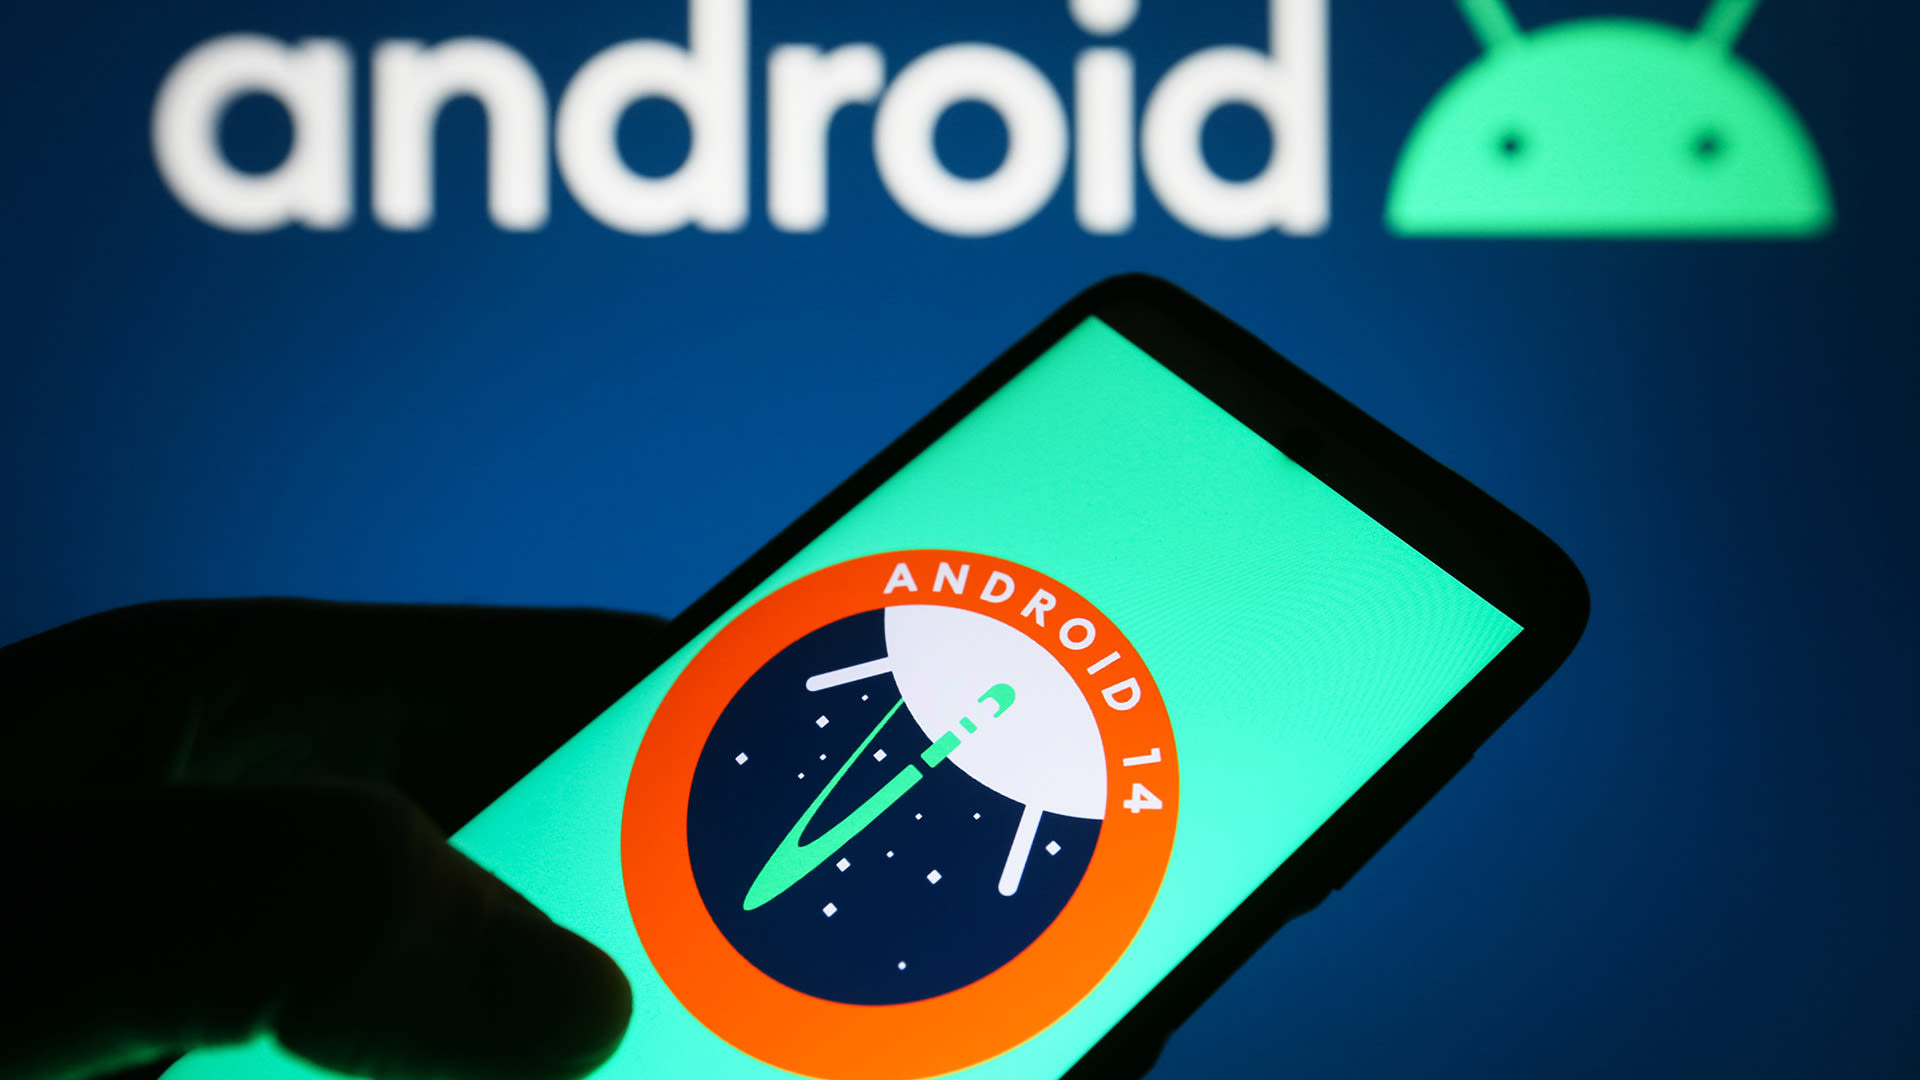 Google gives free upgrade to Android owners but some fans blast it as ‘useless’